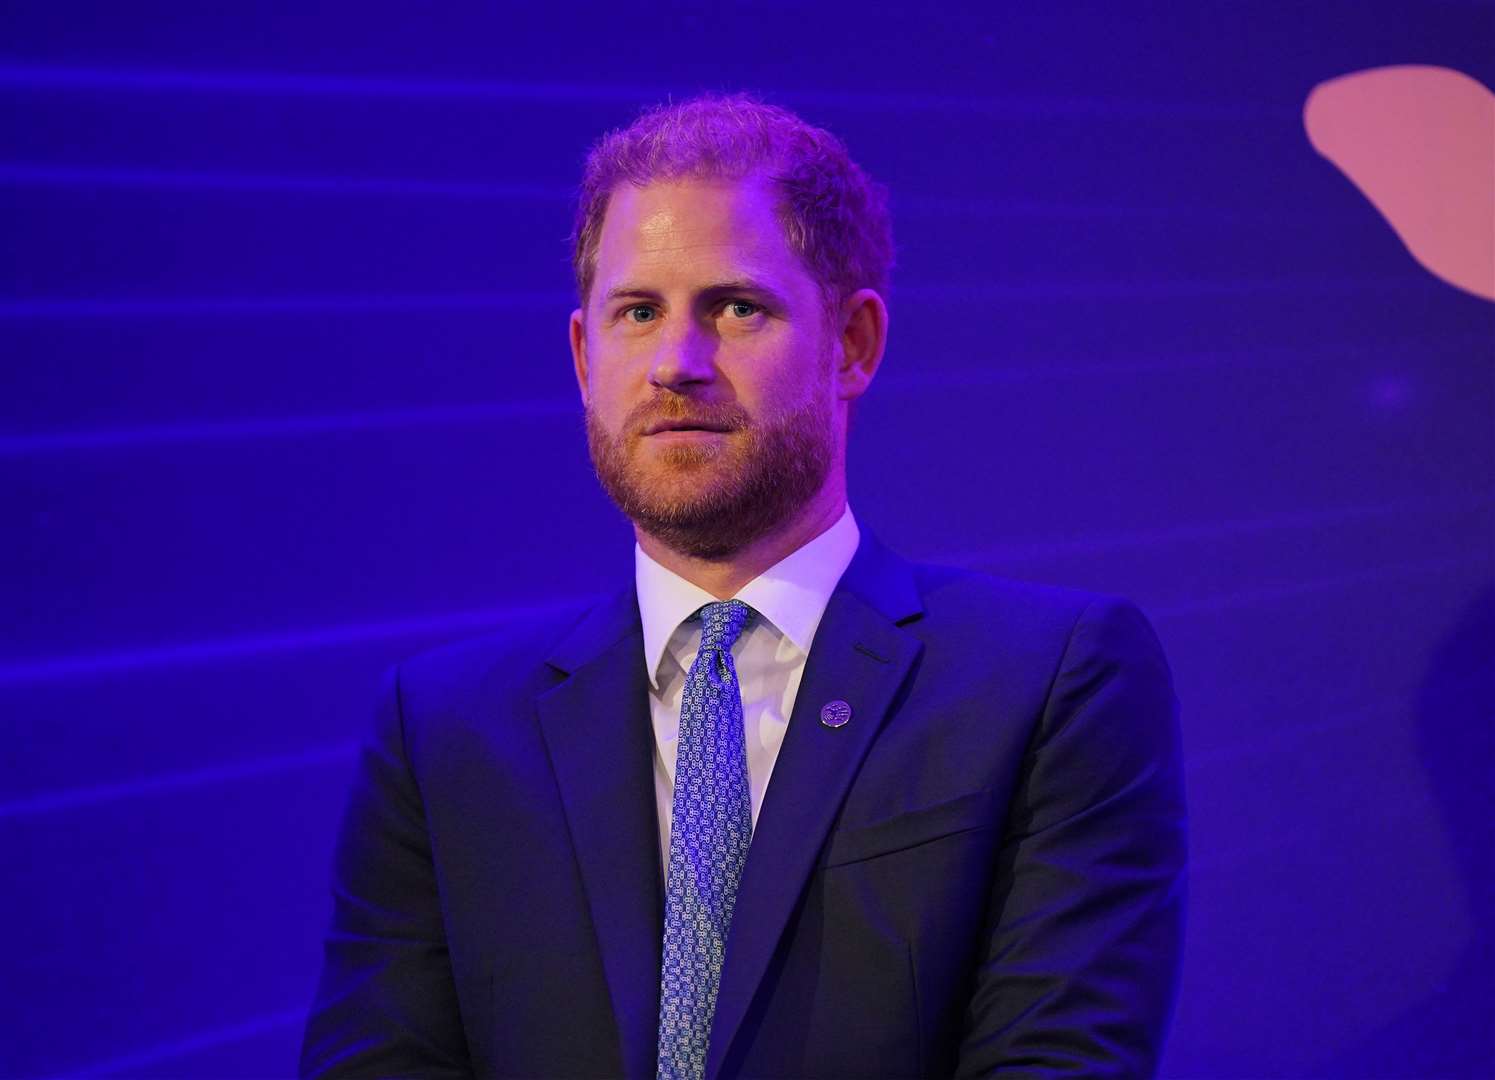 The Duke of Sussex at the WellChild awards on the eve of the anniversary (Yui Mok/PA)